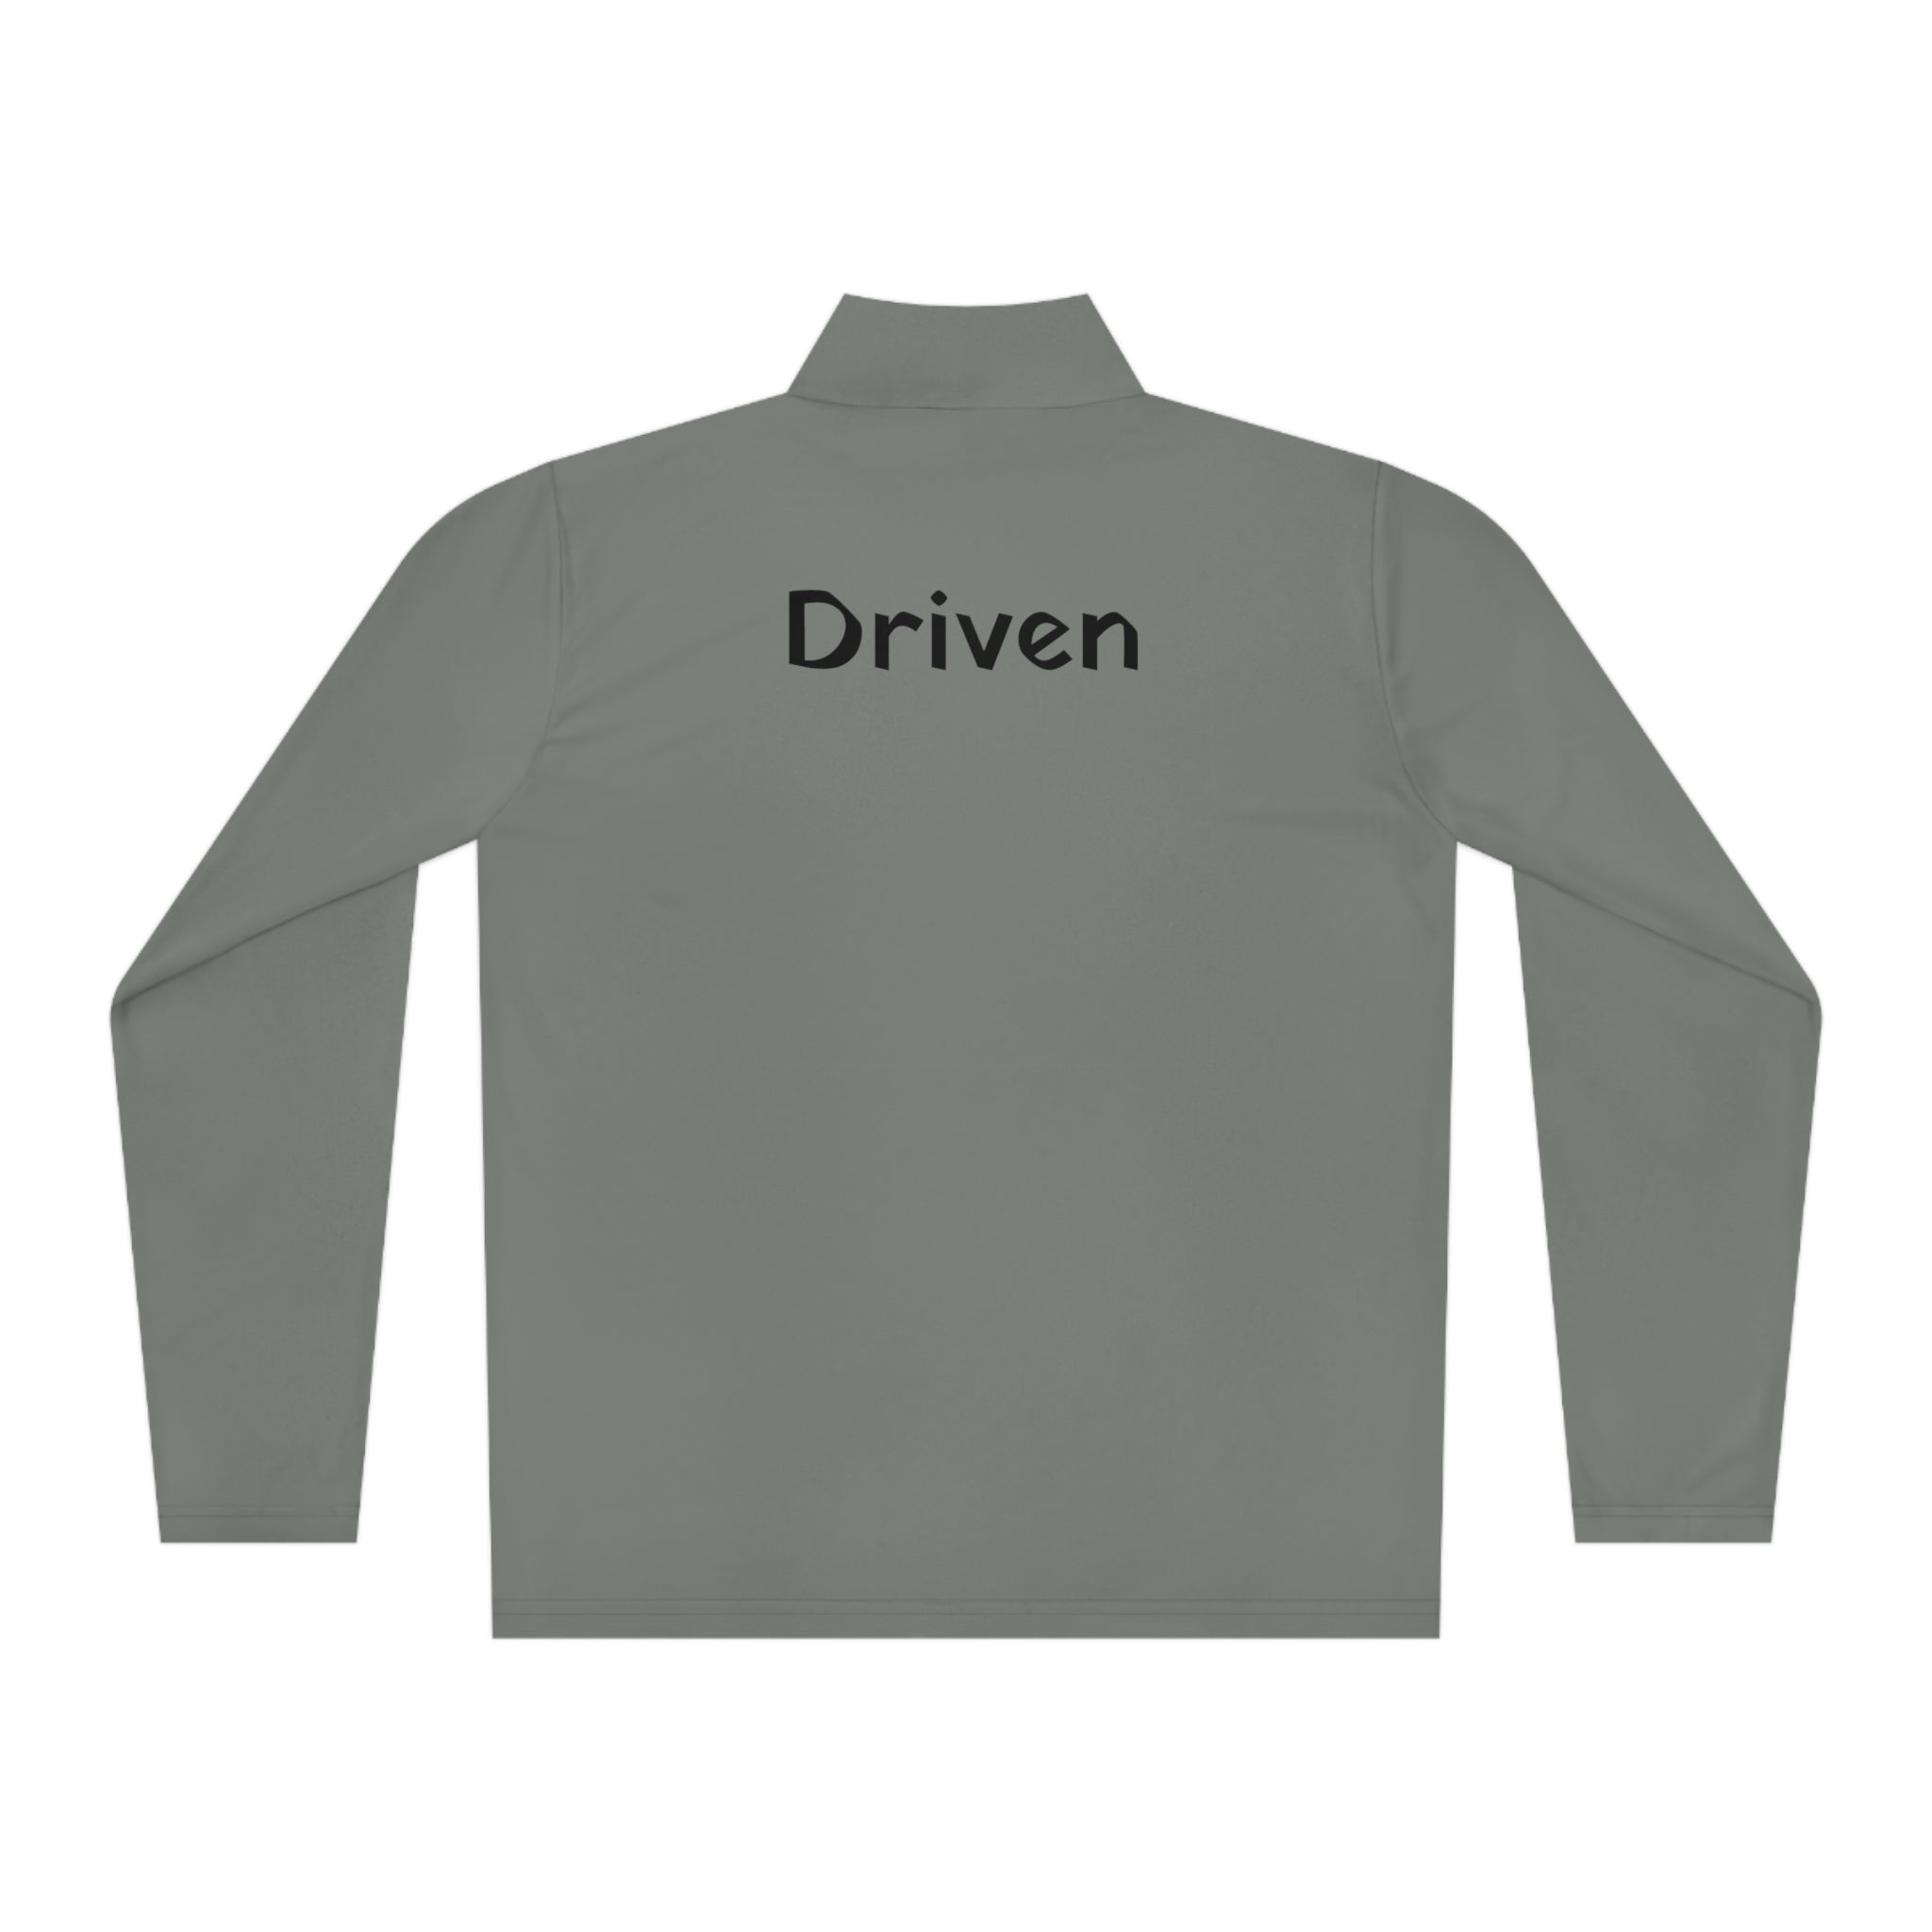 Driven Q-Zip Pullover: Promote Mental Health Atomic Blue Casual Pullover Cozy Pullover Crewneck Pullover Fashion Pullover Graphic Pullover Knit Pullover Layering Piece Lightweight Pullover Men's Pullover Pullover Pullover Collection Pullover Sweater Stylish Pullover Trendy Pullover Women's Pullover Long-sleeve 3848336372373813979_2048 Printify